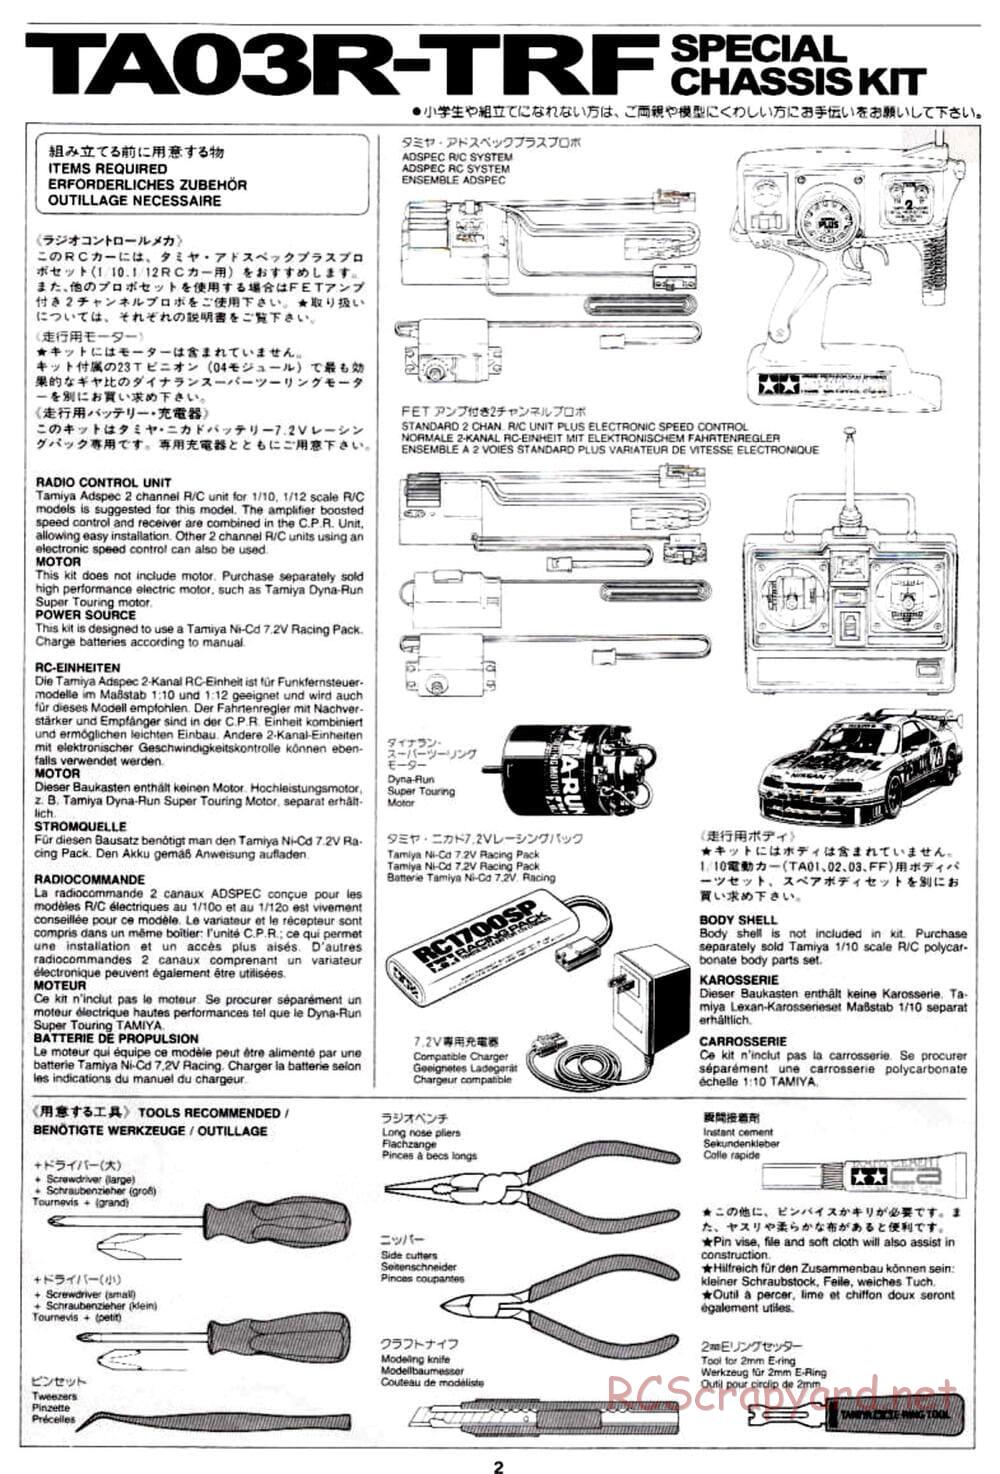 Tamiya - TA-03R TRF Special Edition Chassis - Manual - Page 2